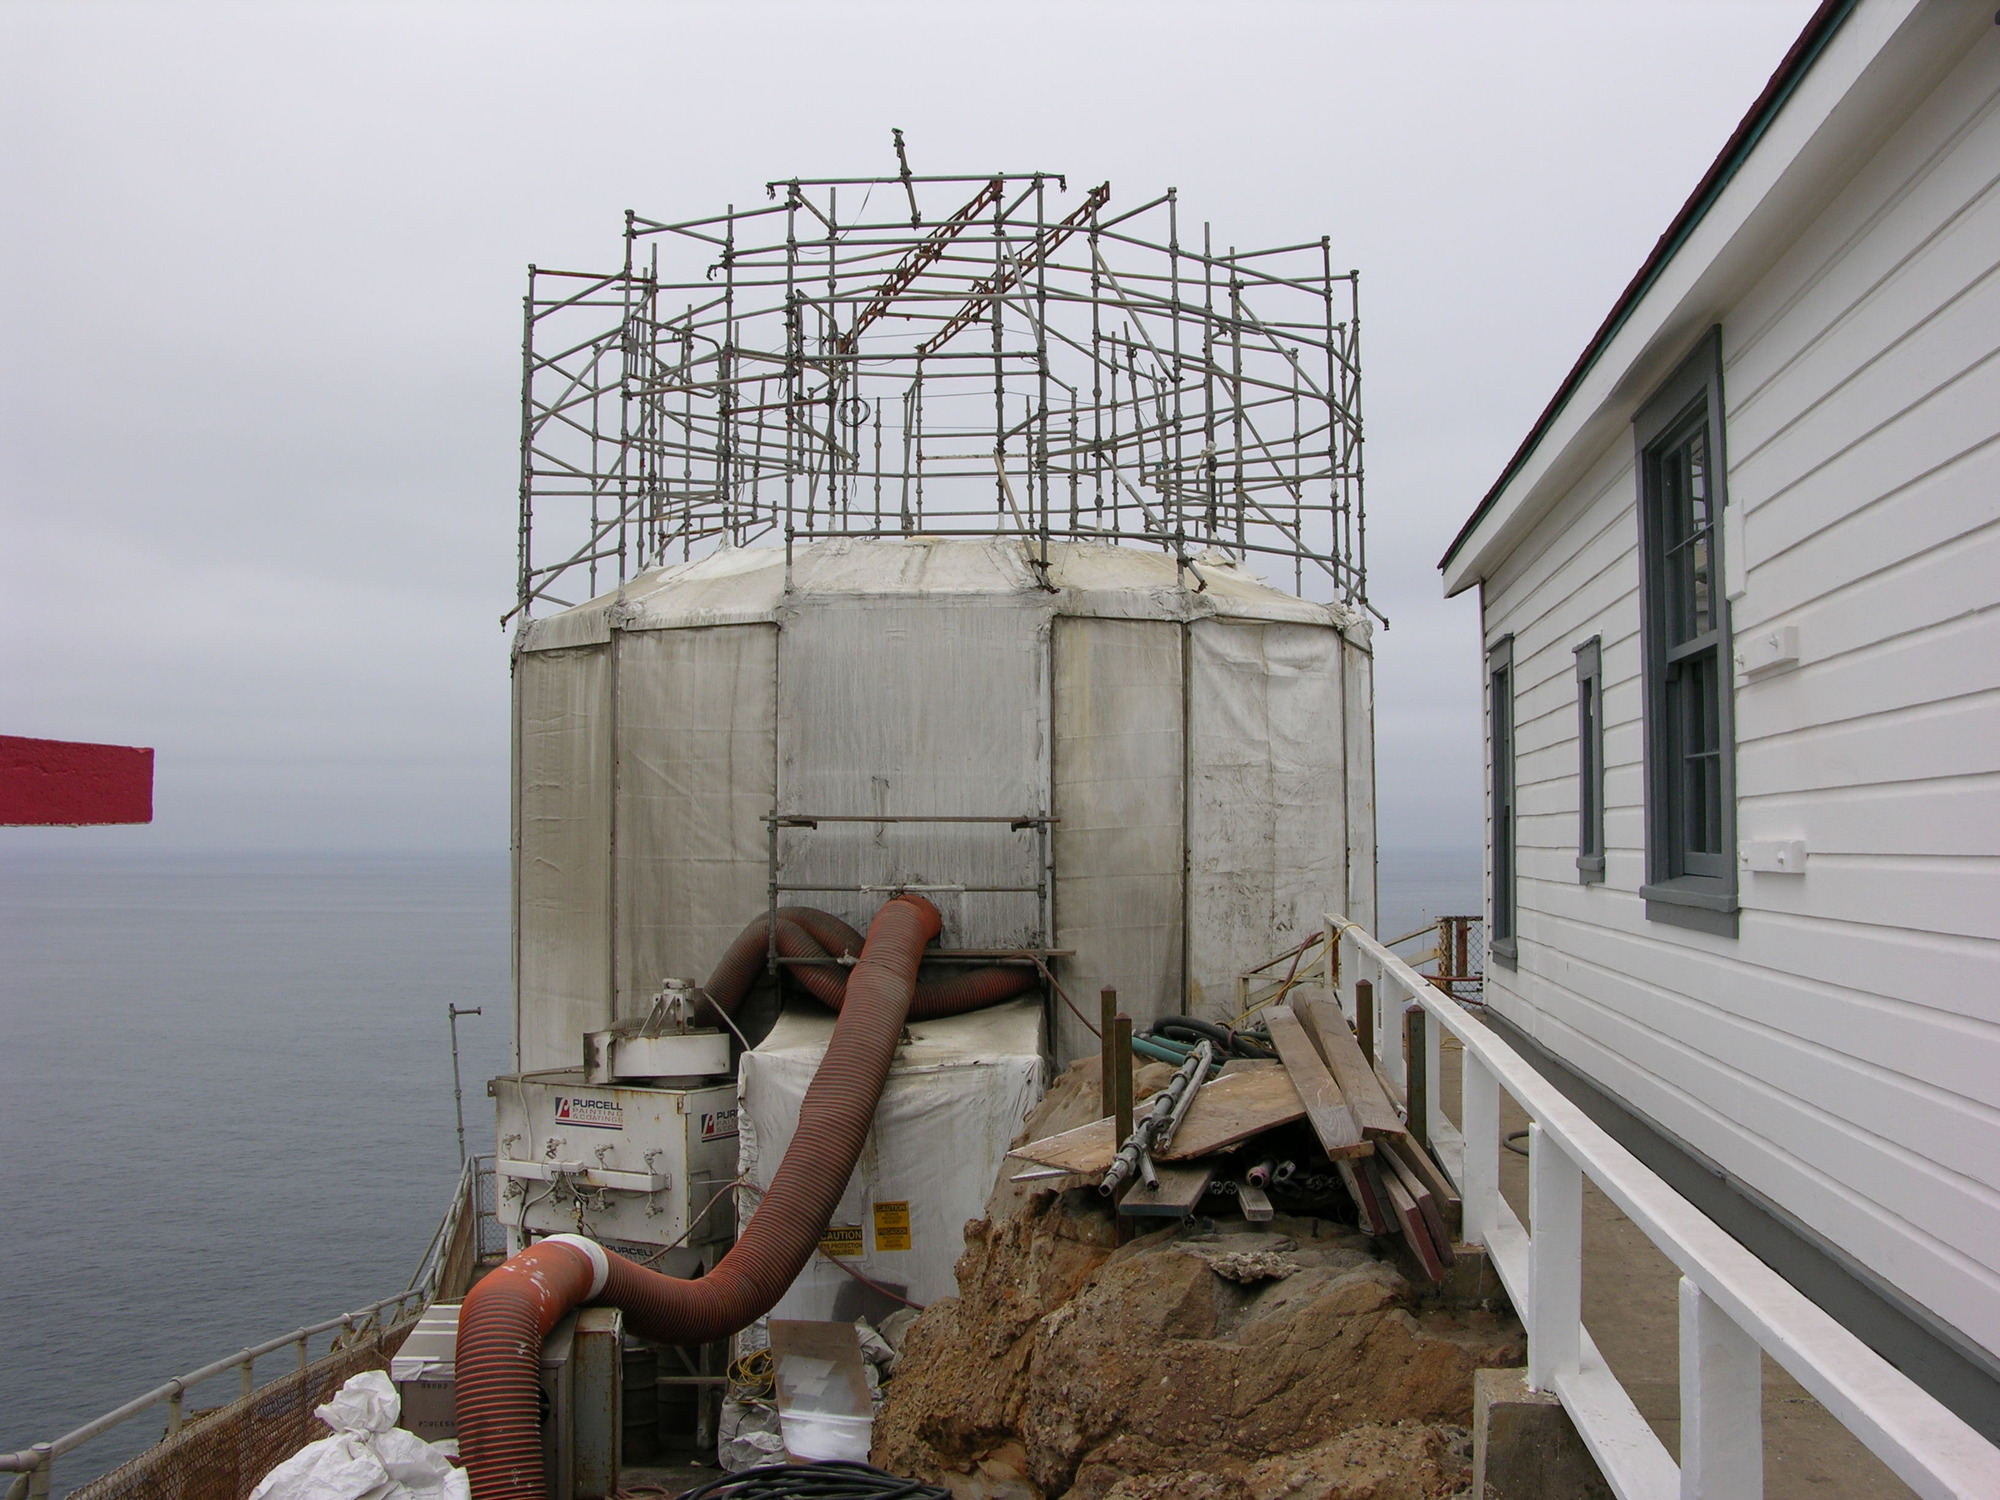 A cylindrical, white but dirty, nylon shroud and metal scaffolding surrounds sits on a rocky headland above the Pacific Ocean. Large flexible tubes connect a ventilation system to the "shroud" surrounding the tower. On the right is the side of a wooden building painted white with gray window frames.